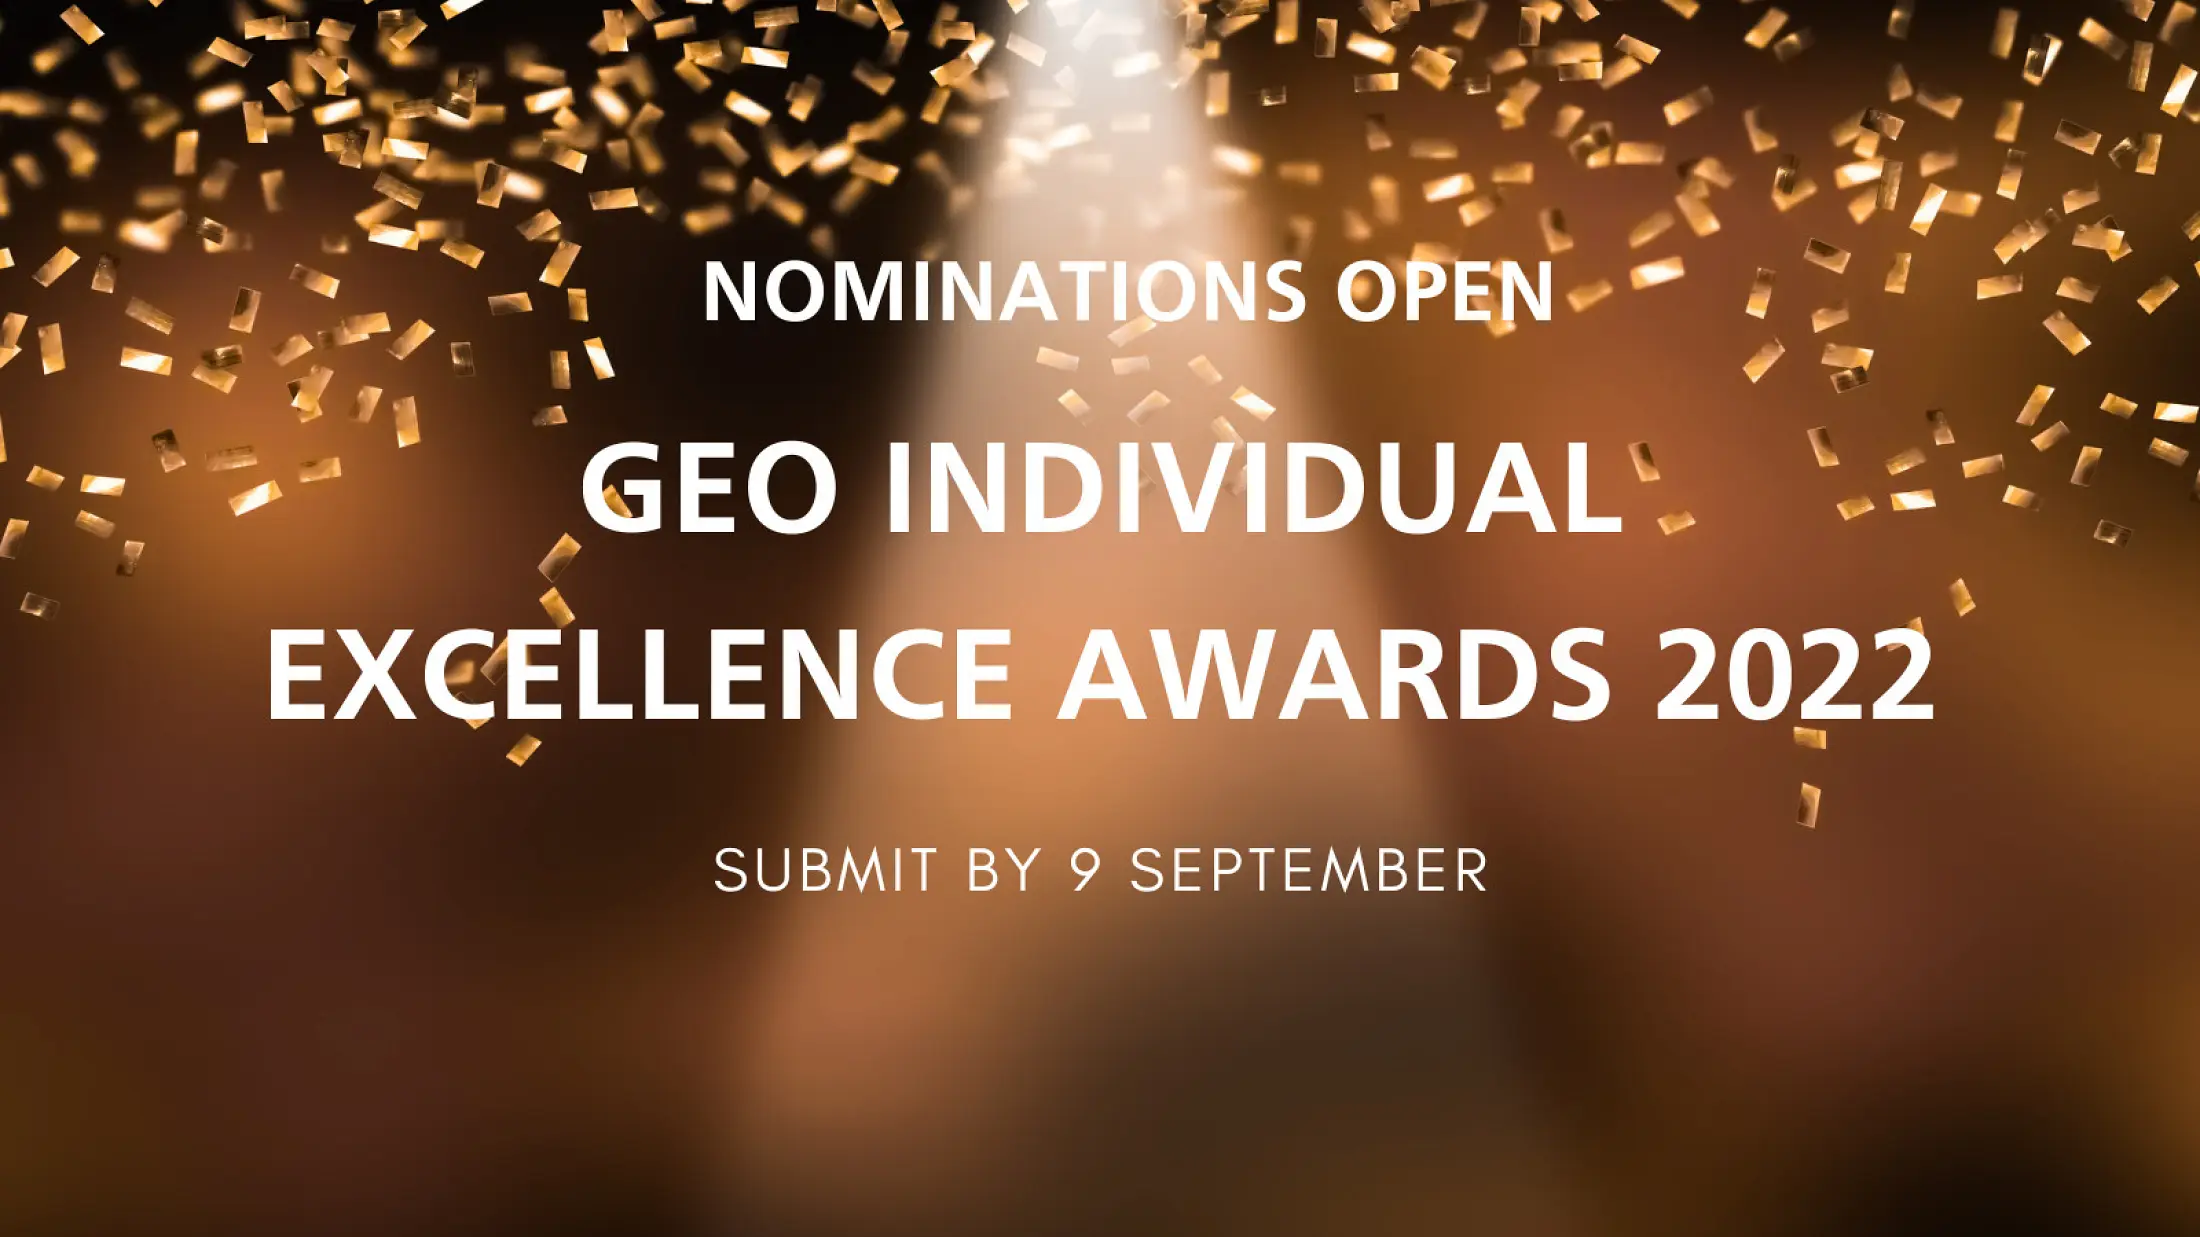 Nominations open for GEO Individual Excellence Awards 2022